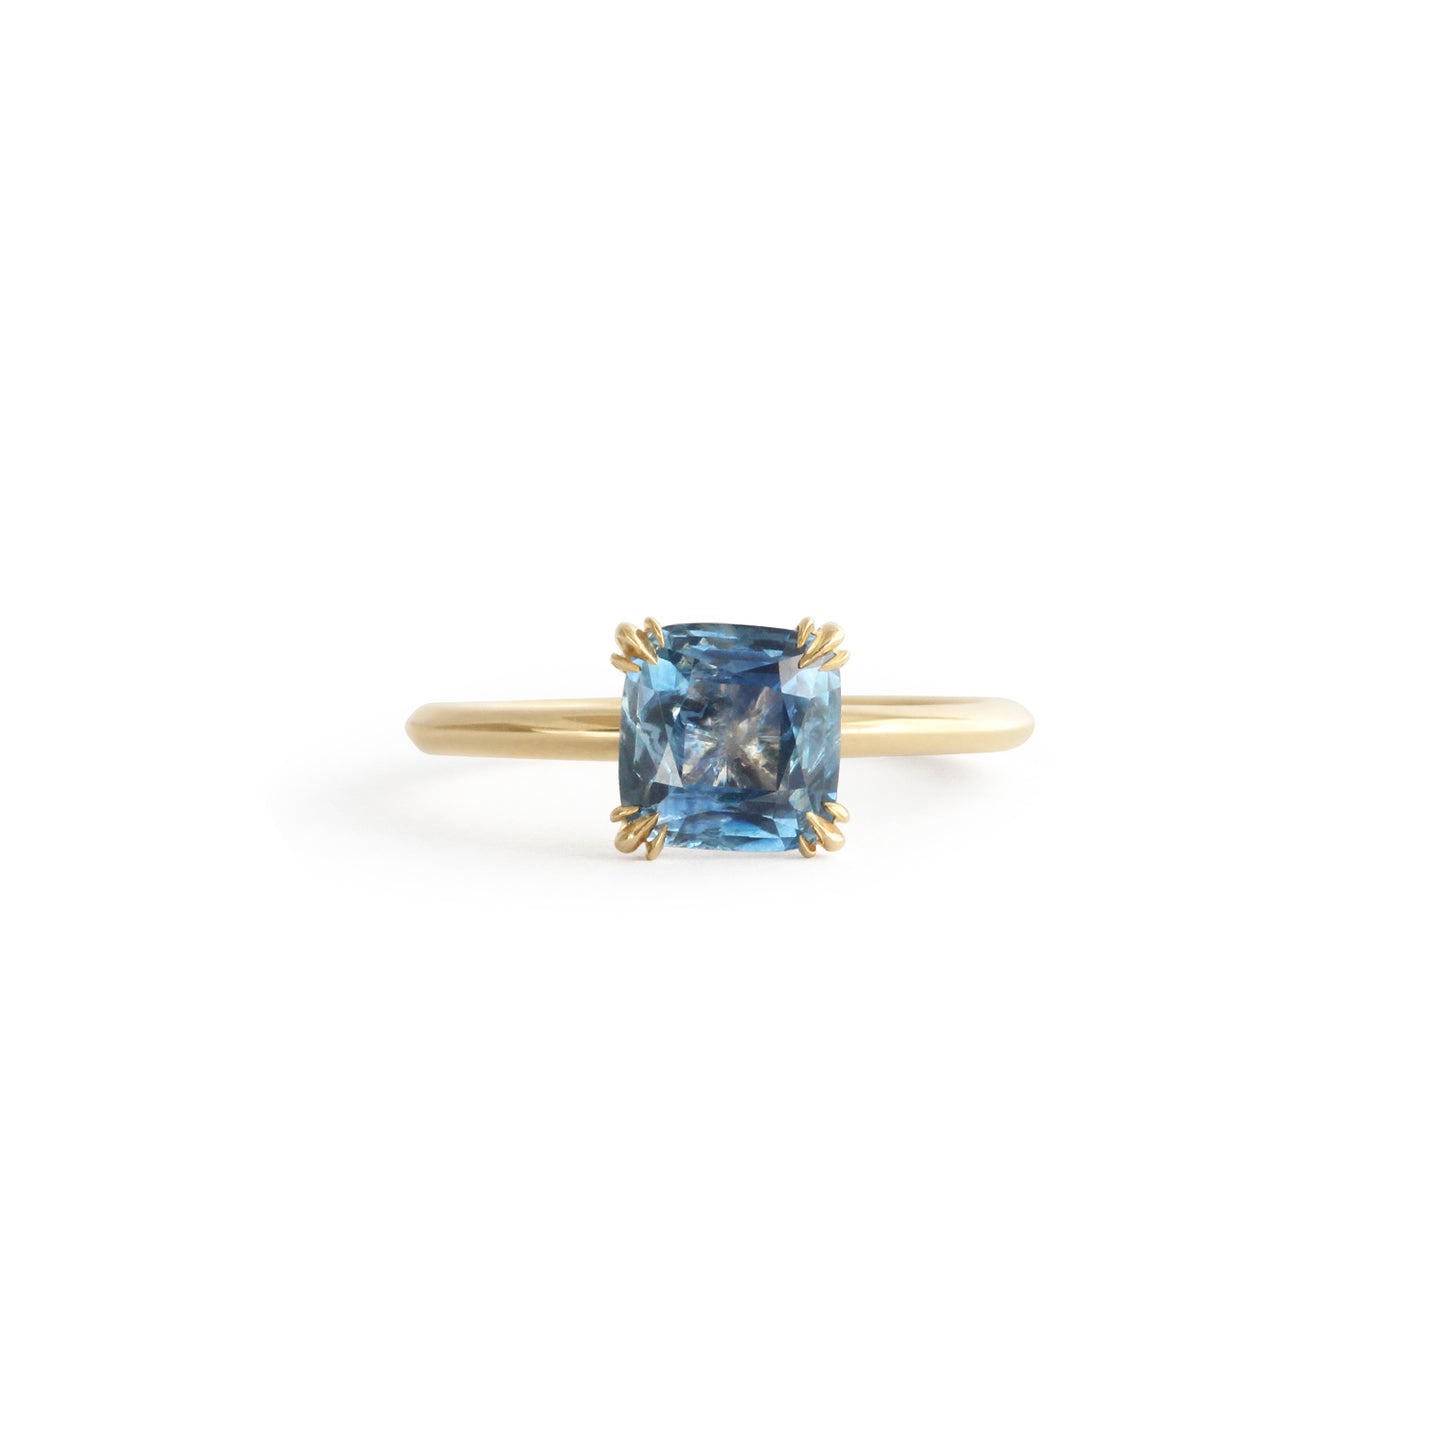 Cornice Claw Ring / Cushion Cut Blue Sapphire by Goldpoint